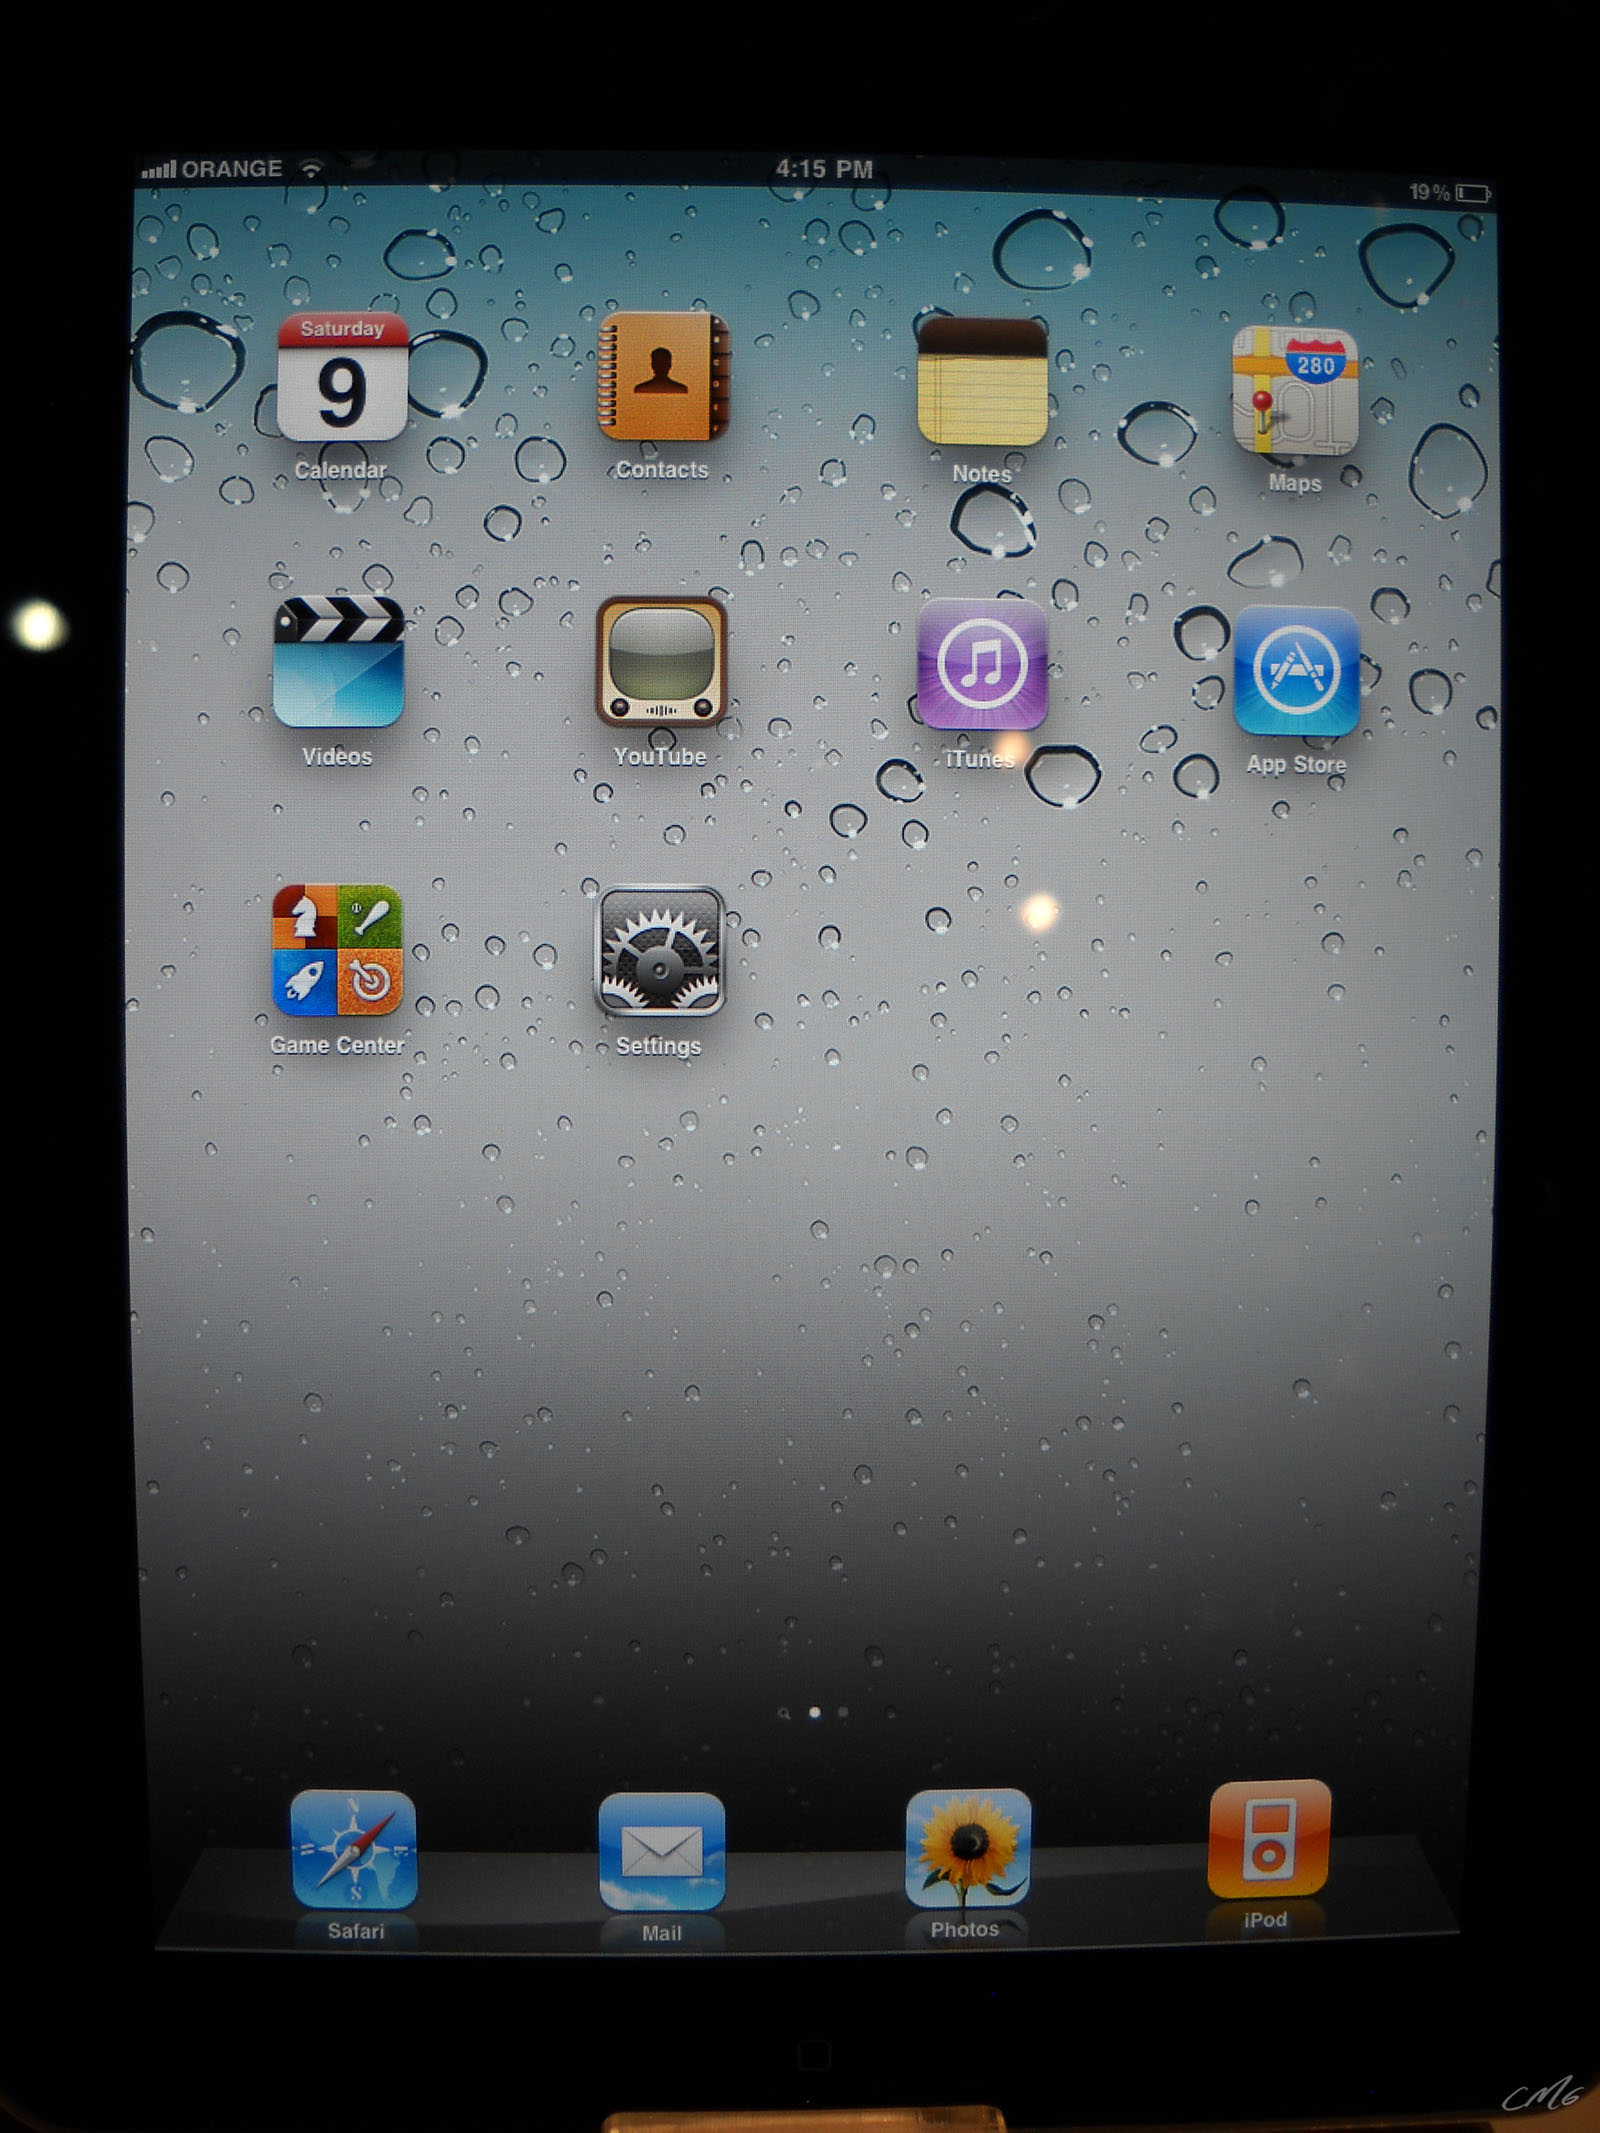 a cell phone and an ipad with water droplets on it